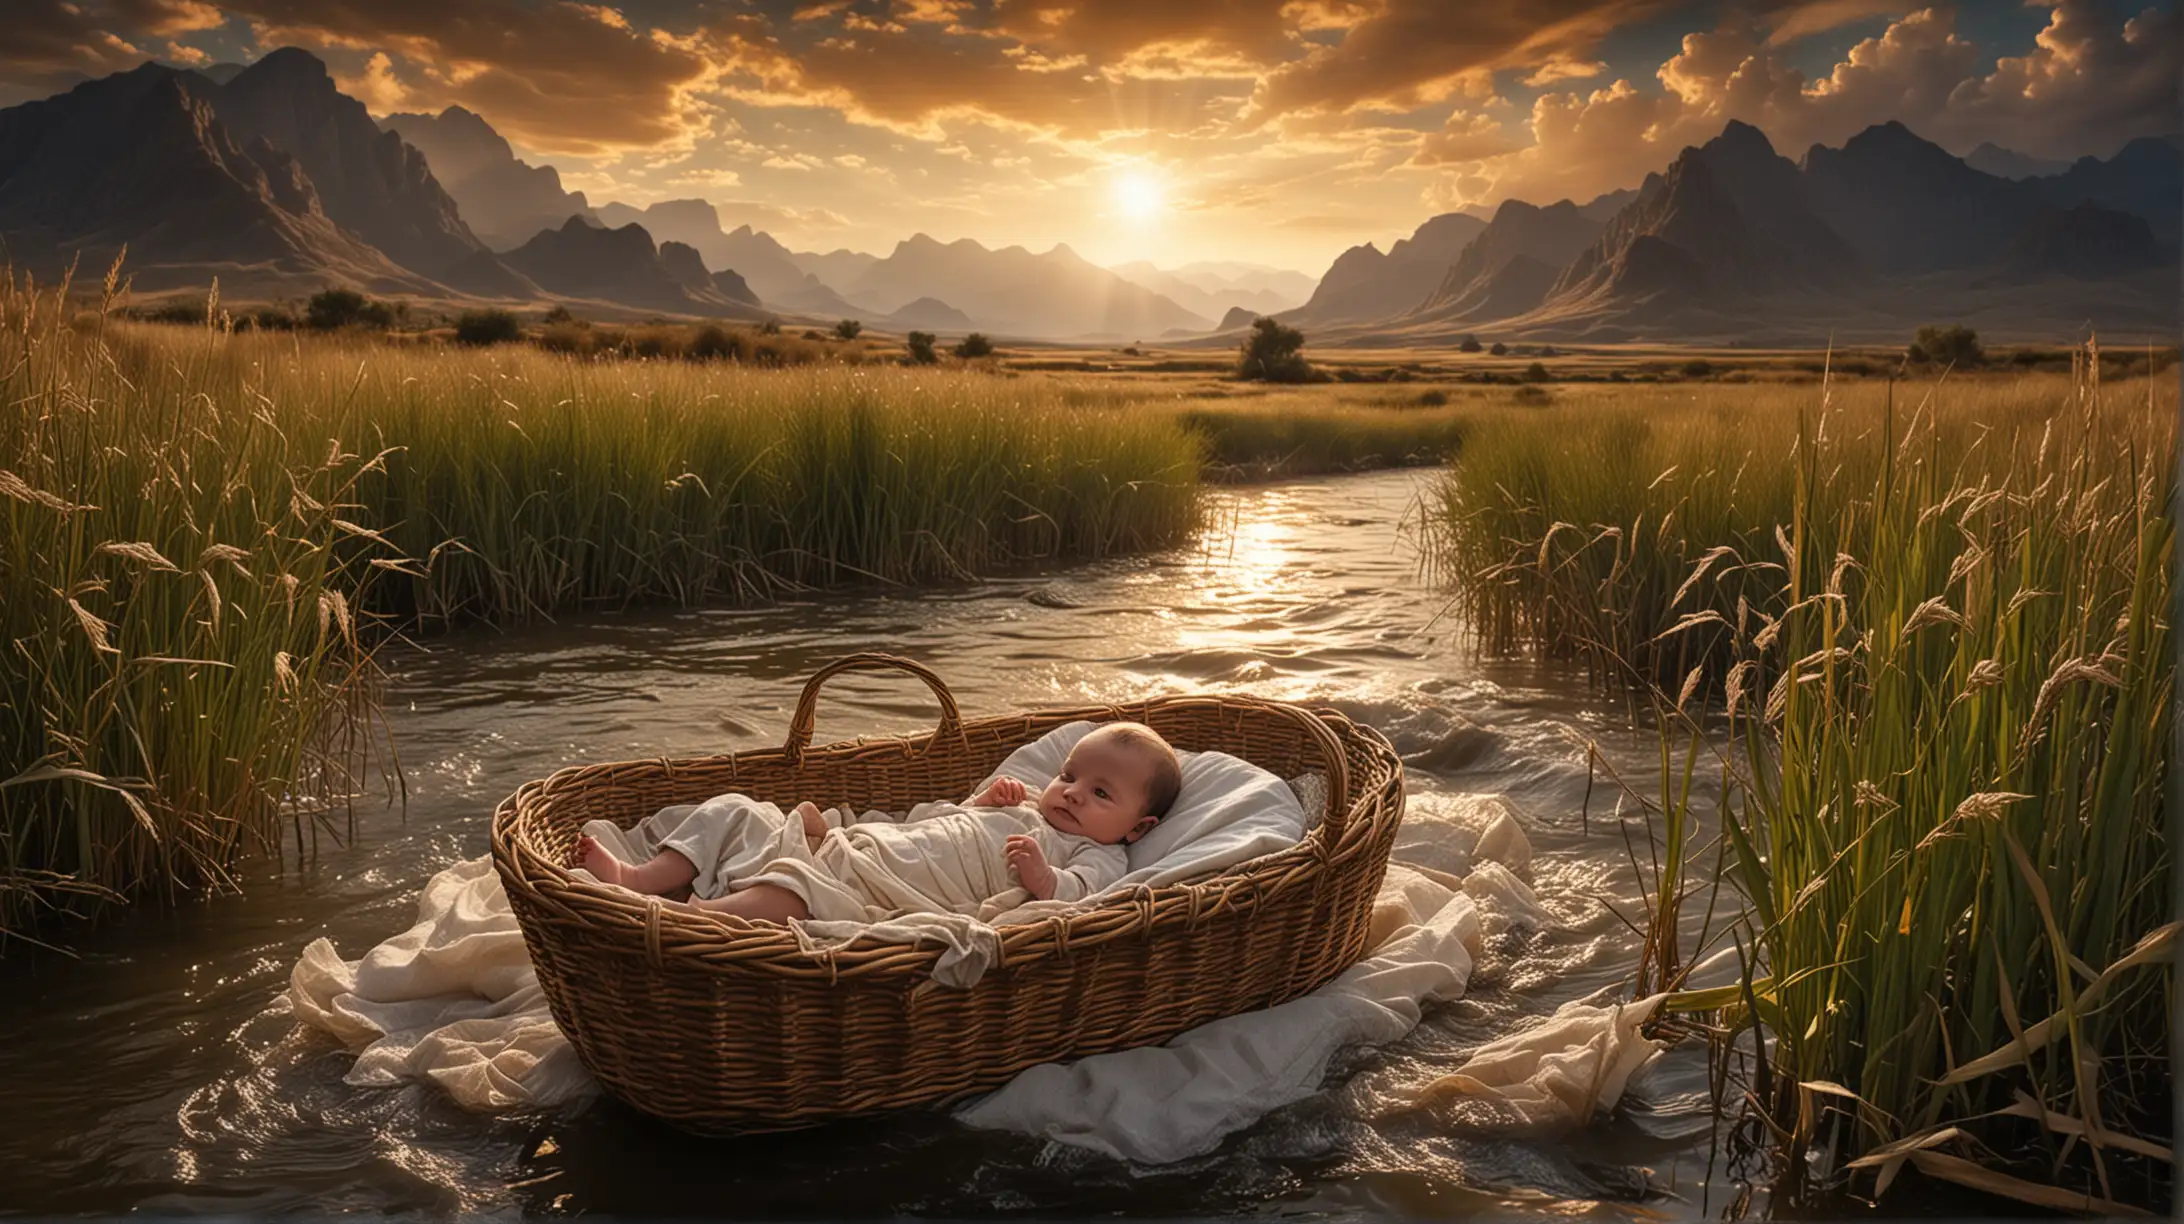 A baby in a moses basket, floating in a river, among the reeds. Mountains in the distance, and a magnificent sky, during the era of the Biblcal Moses.